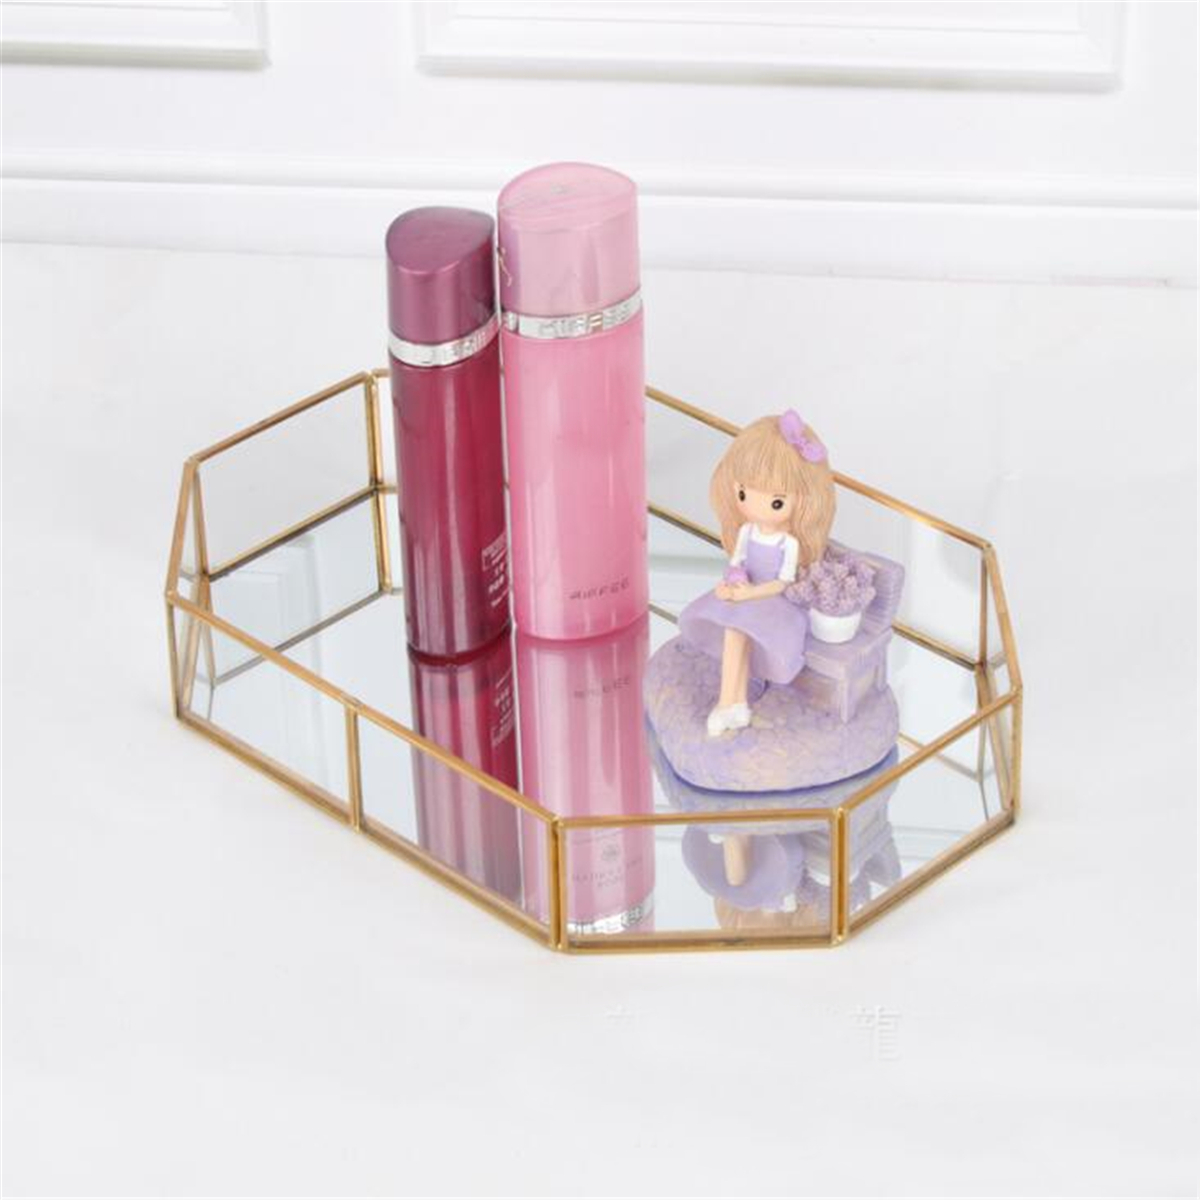 2-Size-Mirror-Glass-Tray-Octagon-Cosmetic-Makeup-Desktop-Organizer-Jewelry-Display-Stand-Holder-1382768-2